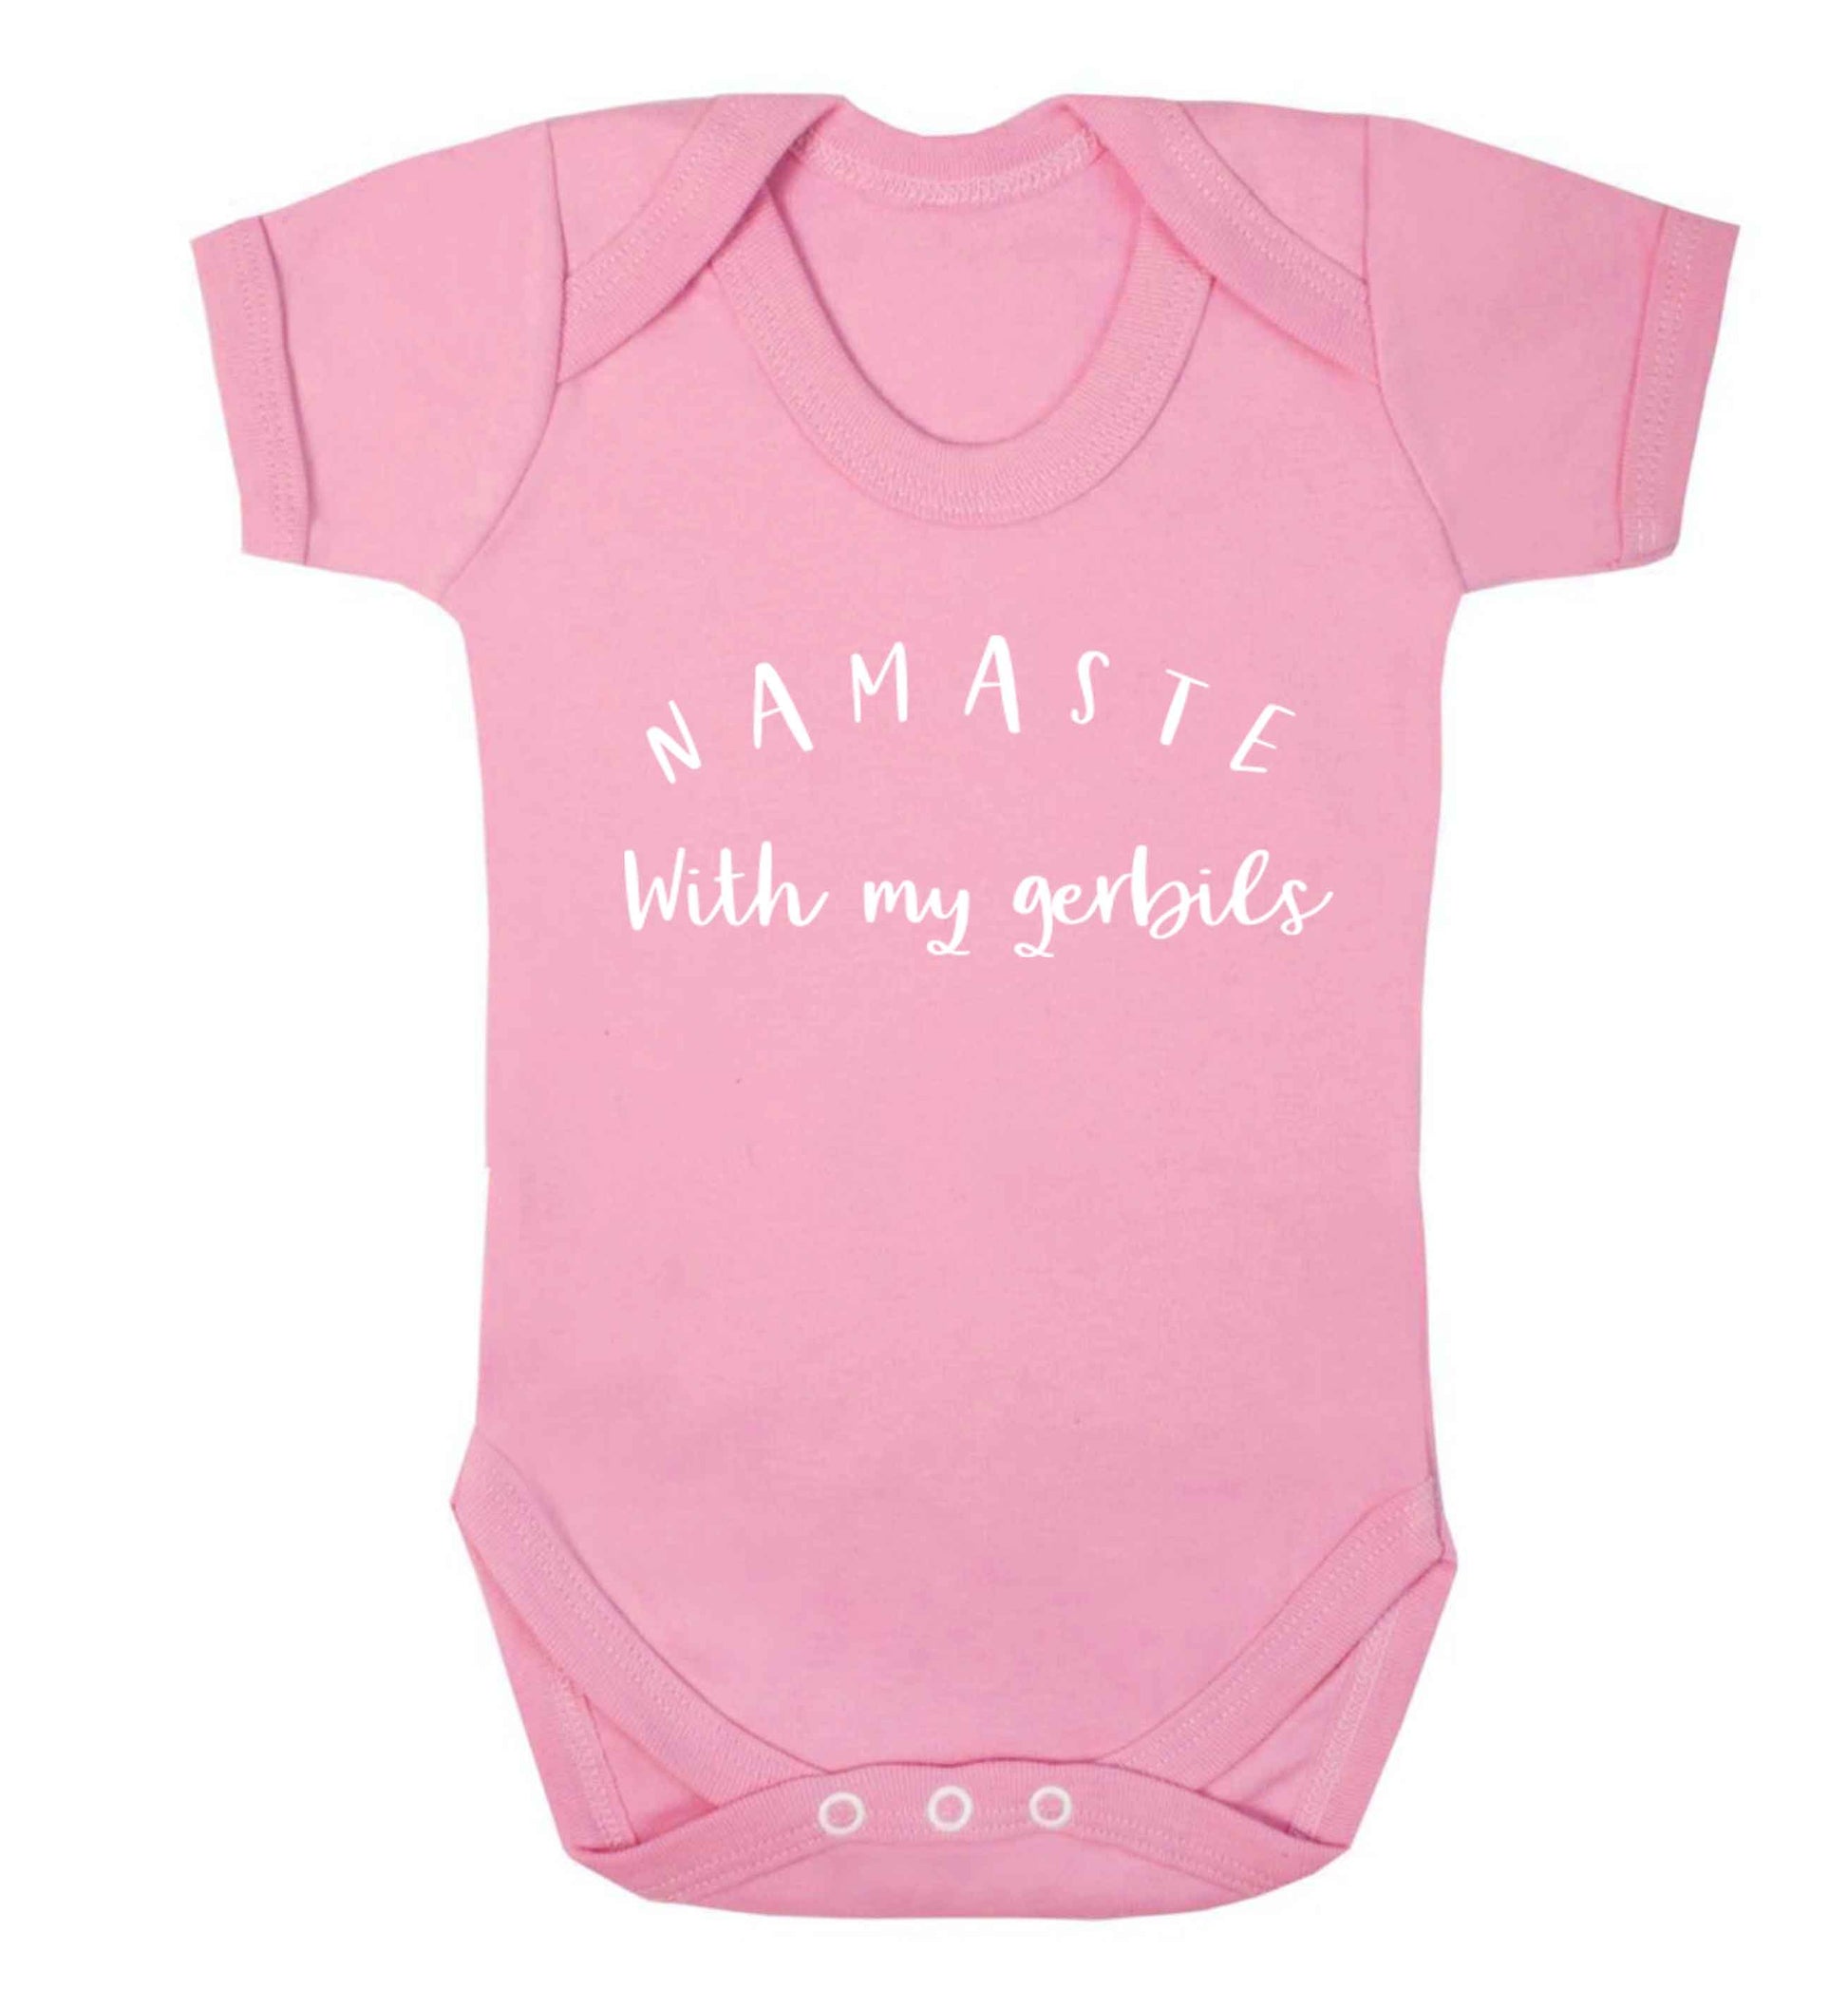 Namaste with my gerbils Baby Vest pale pink 18-24 months